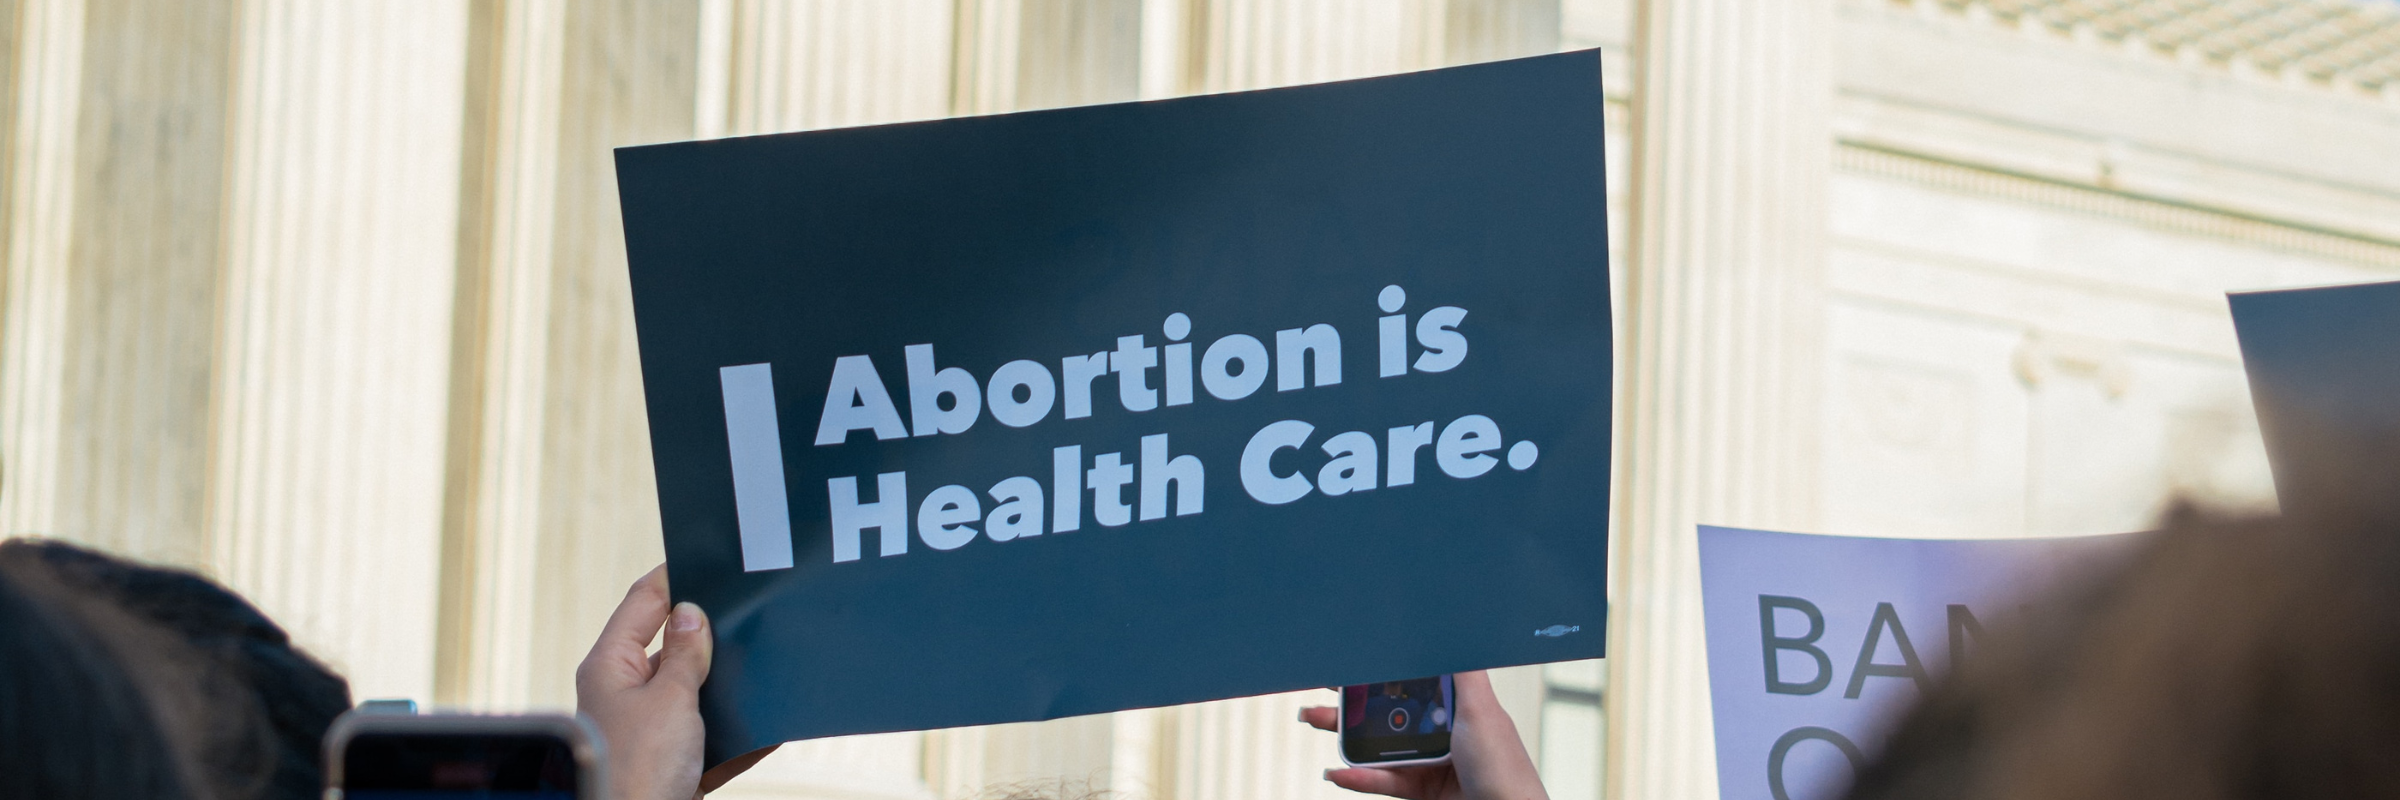 Person holding sign in front of supreme court that says "Abortion is Health Care."